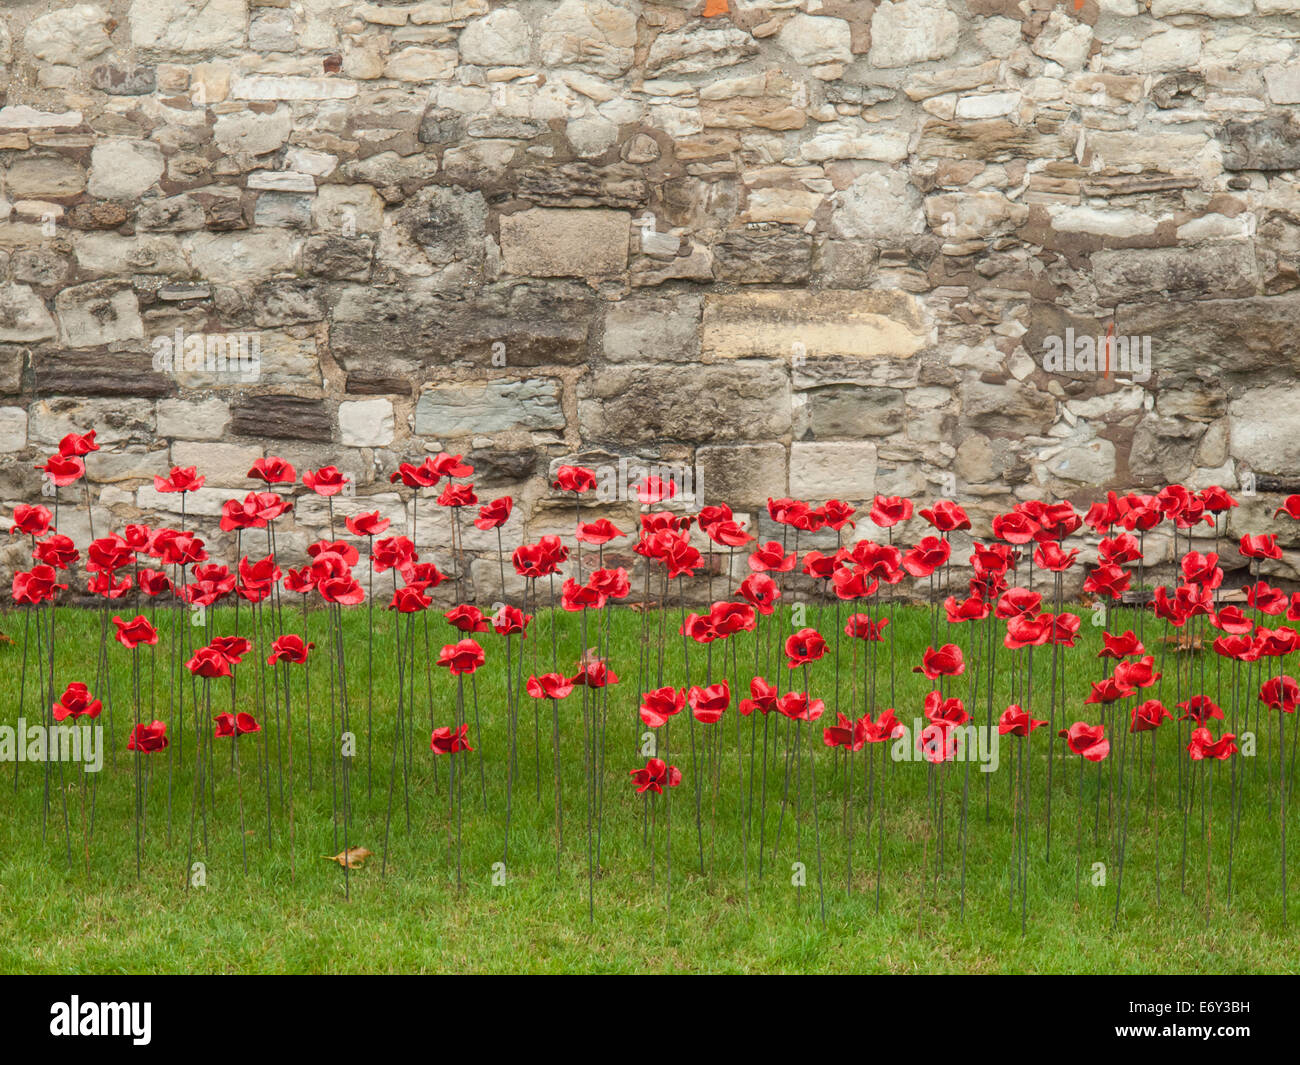 detail of the ceramic poppies exhibit  at the tower of london during heavy rain with the tower wall behind.  The installation by Stock Photo